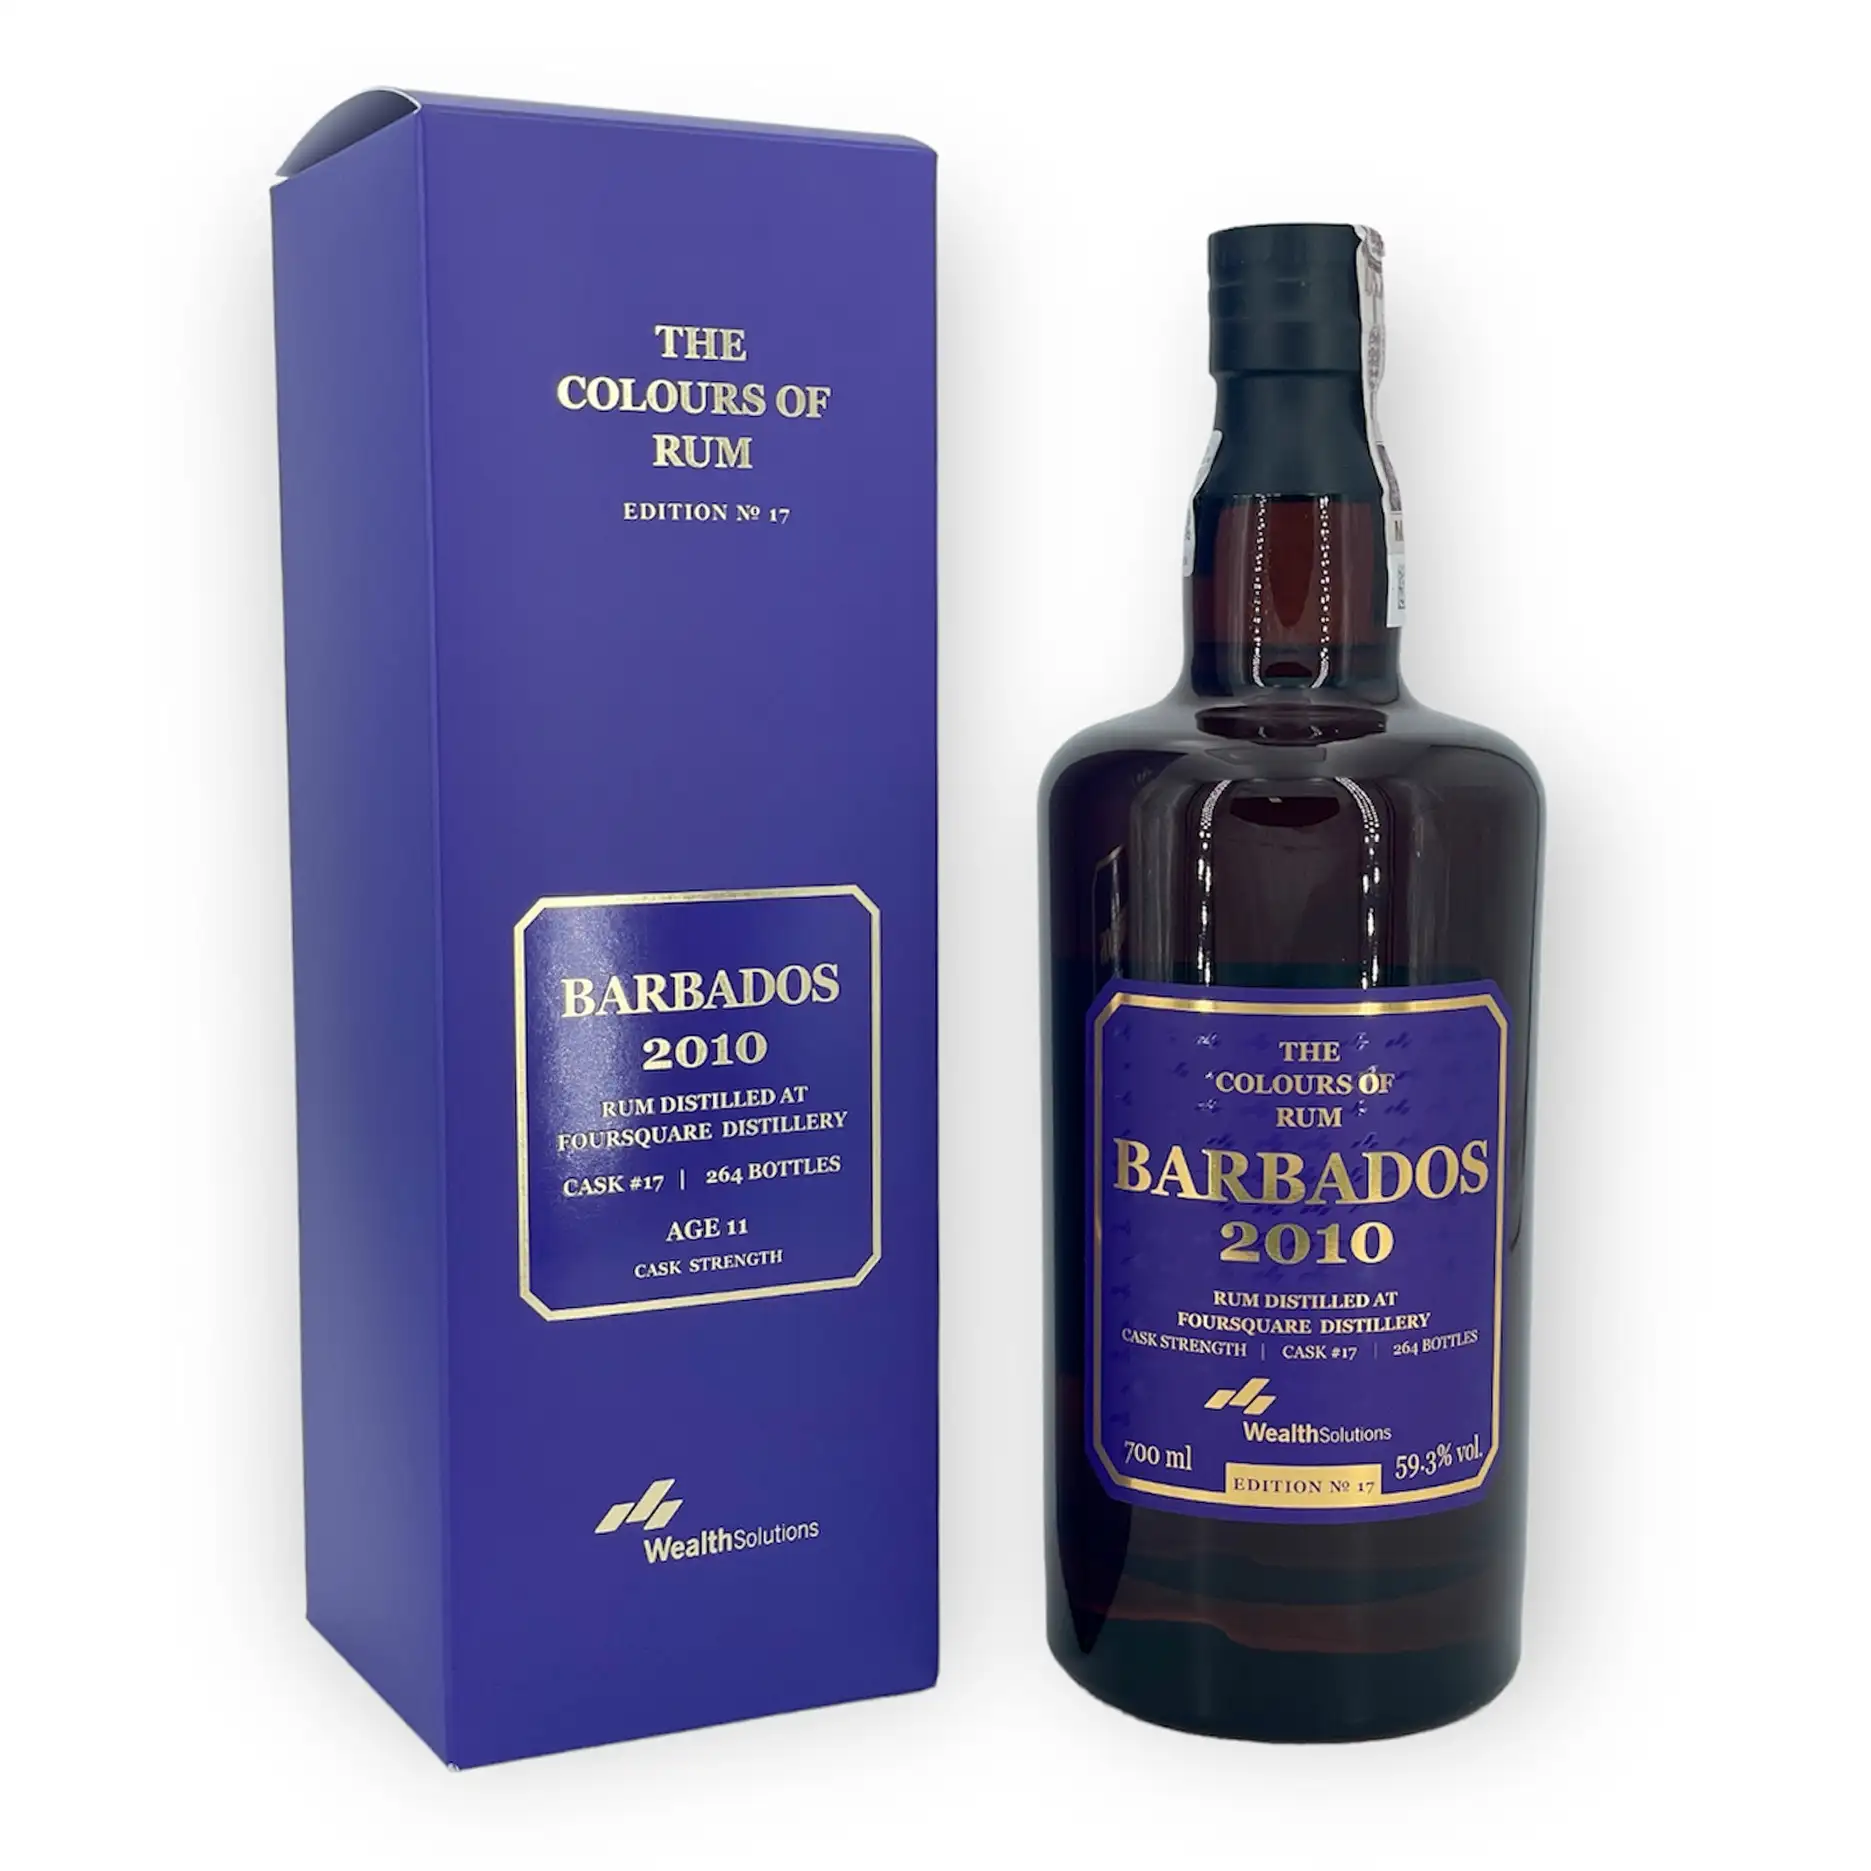 Image of the front of the bottle of the rum Barbados No. 17